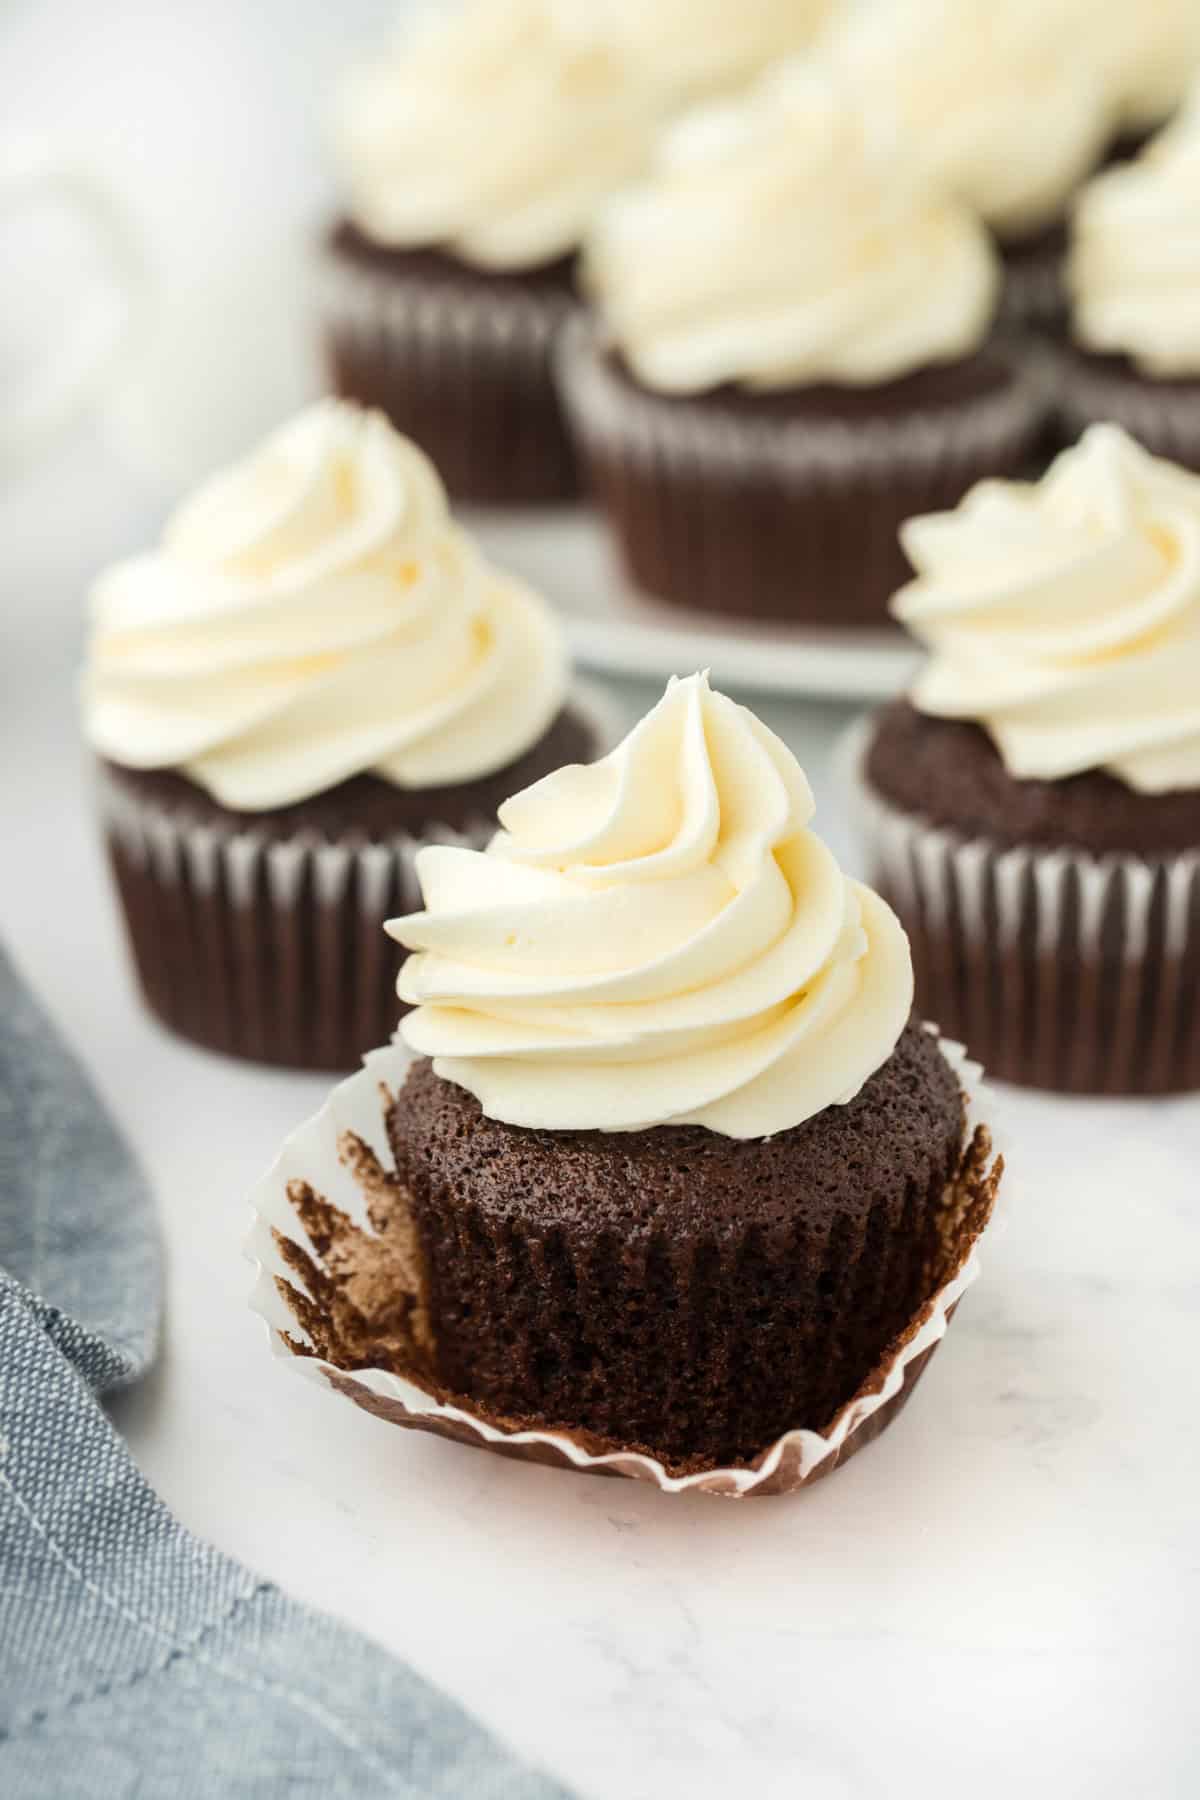 A chocolate cupcake recipe with one having the wrapper down and several in the white background